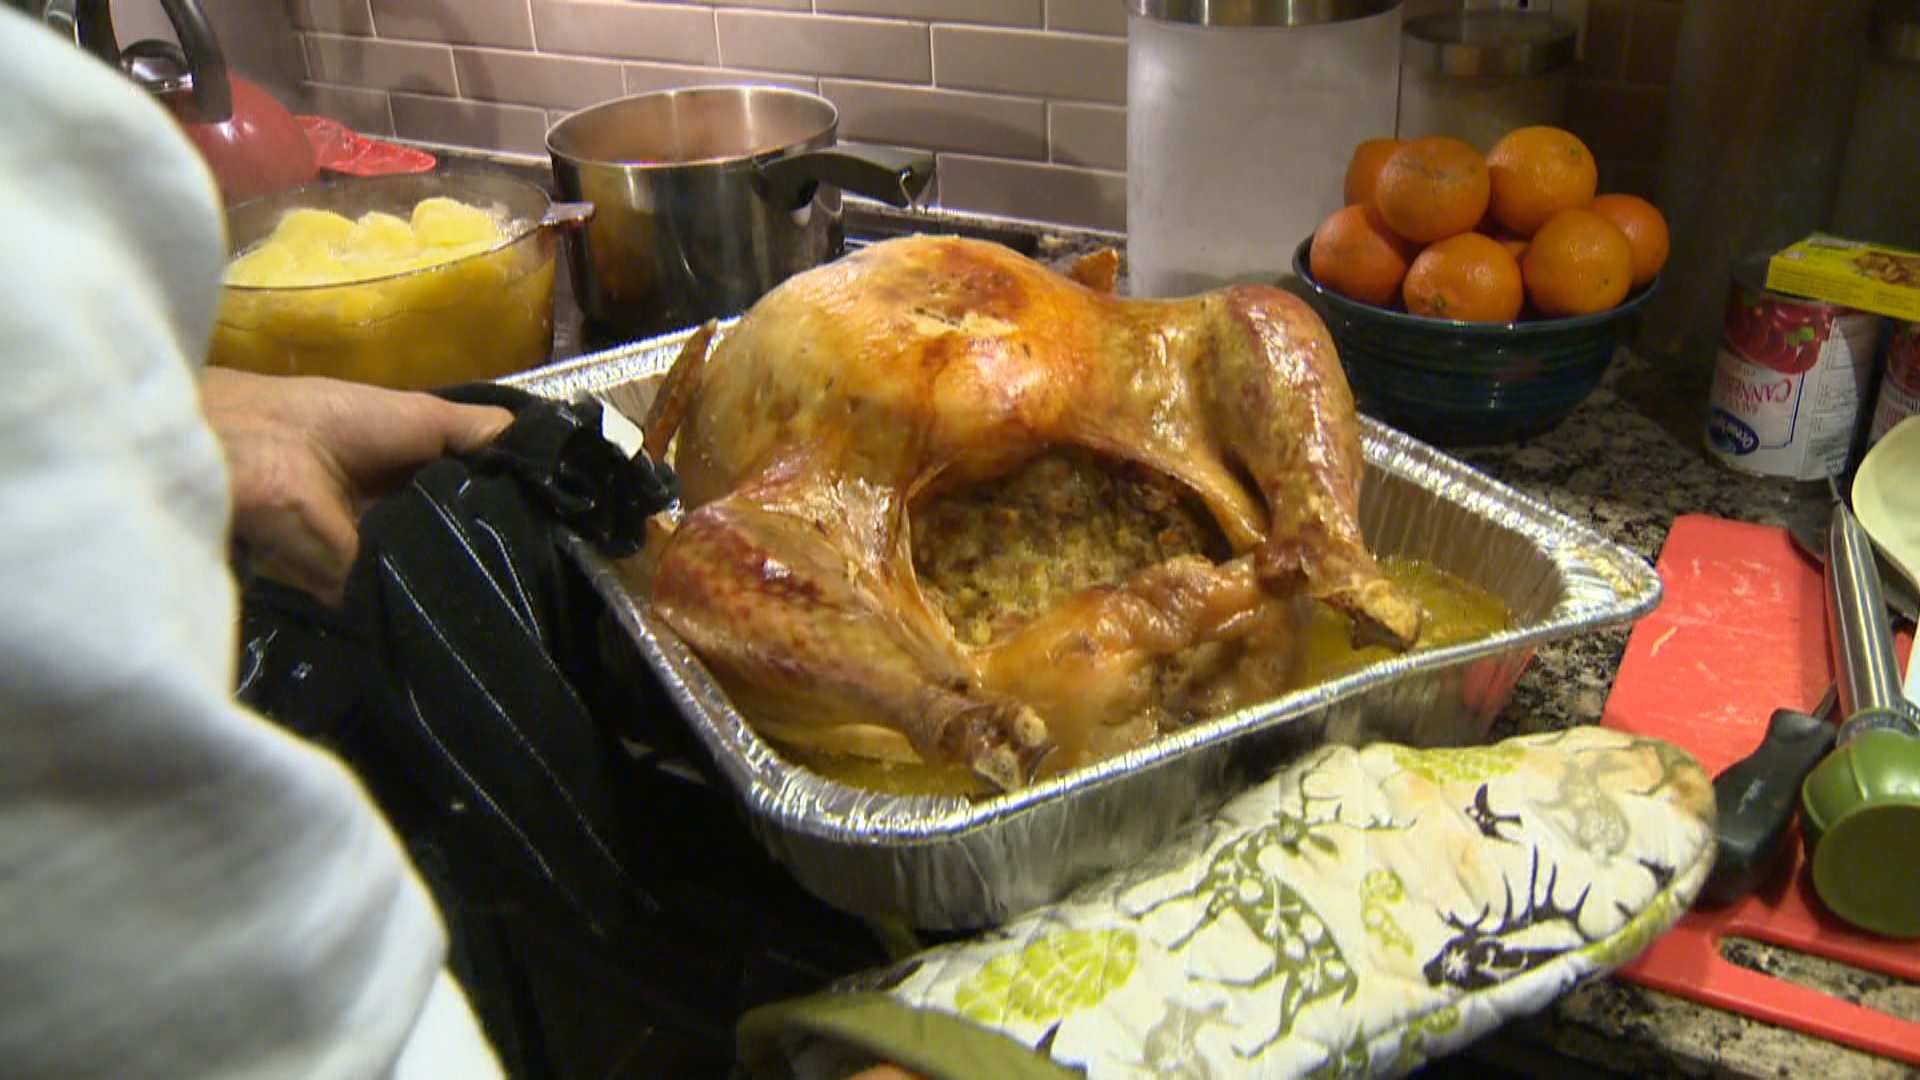 Frugal feast: How Canadians can cut costs on holiday dinners this year